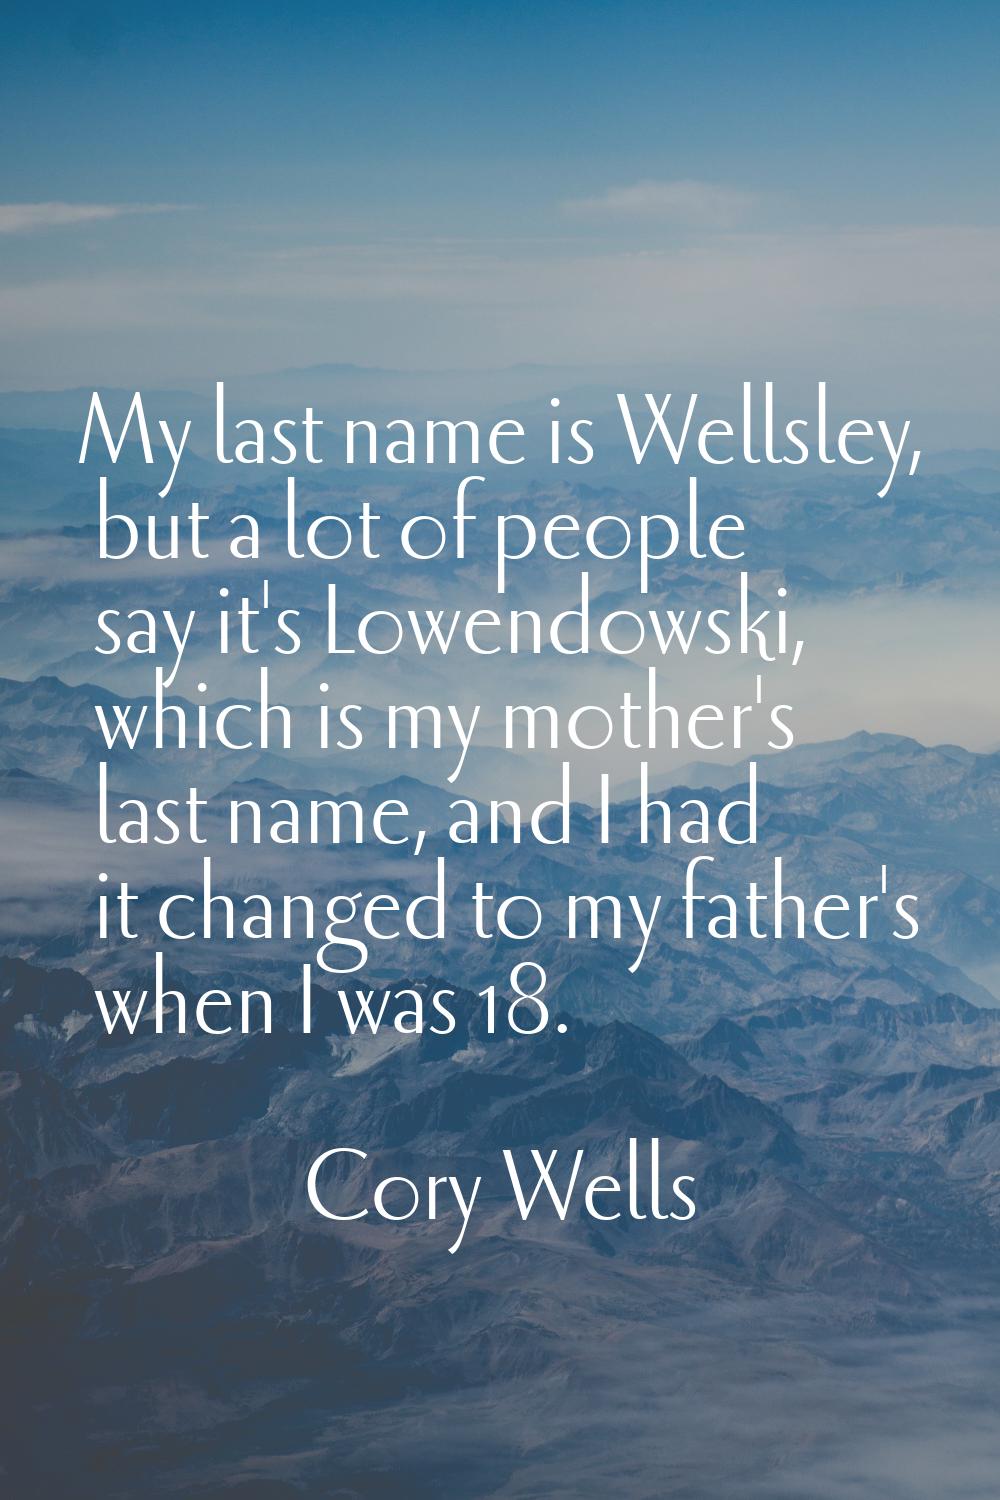 My last name is Wellsley, but a lot of people say it's Lowendowski, which is my mother's last name,